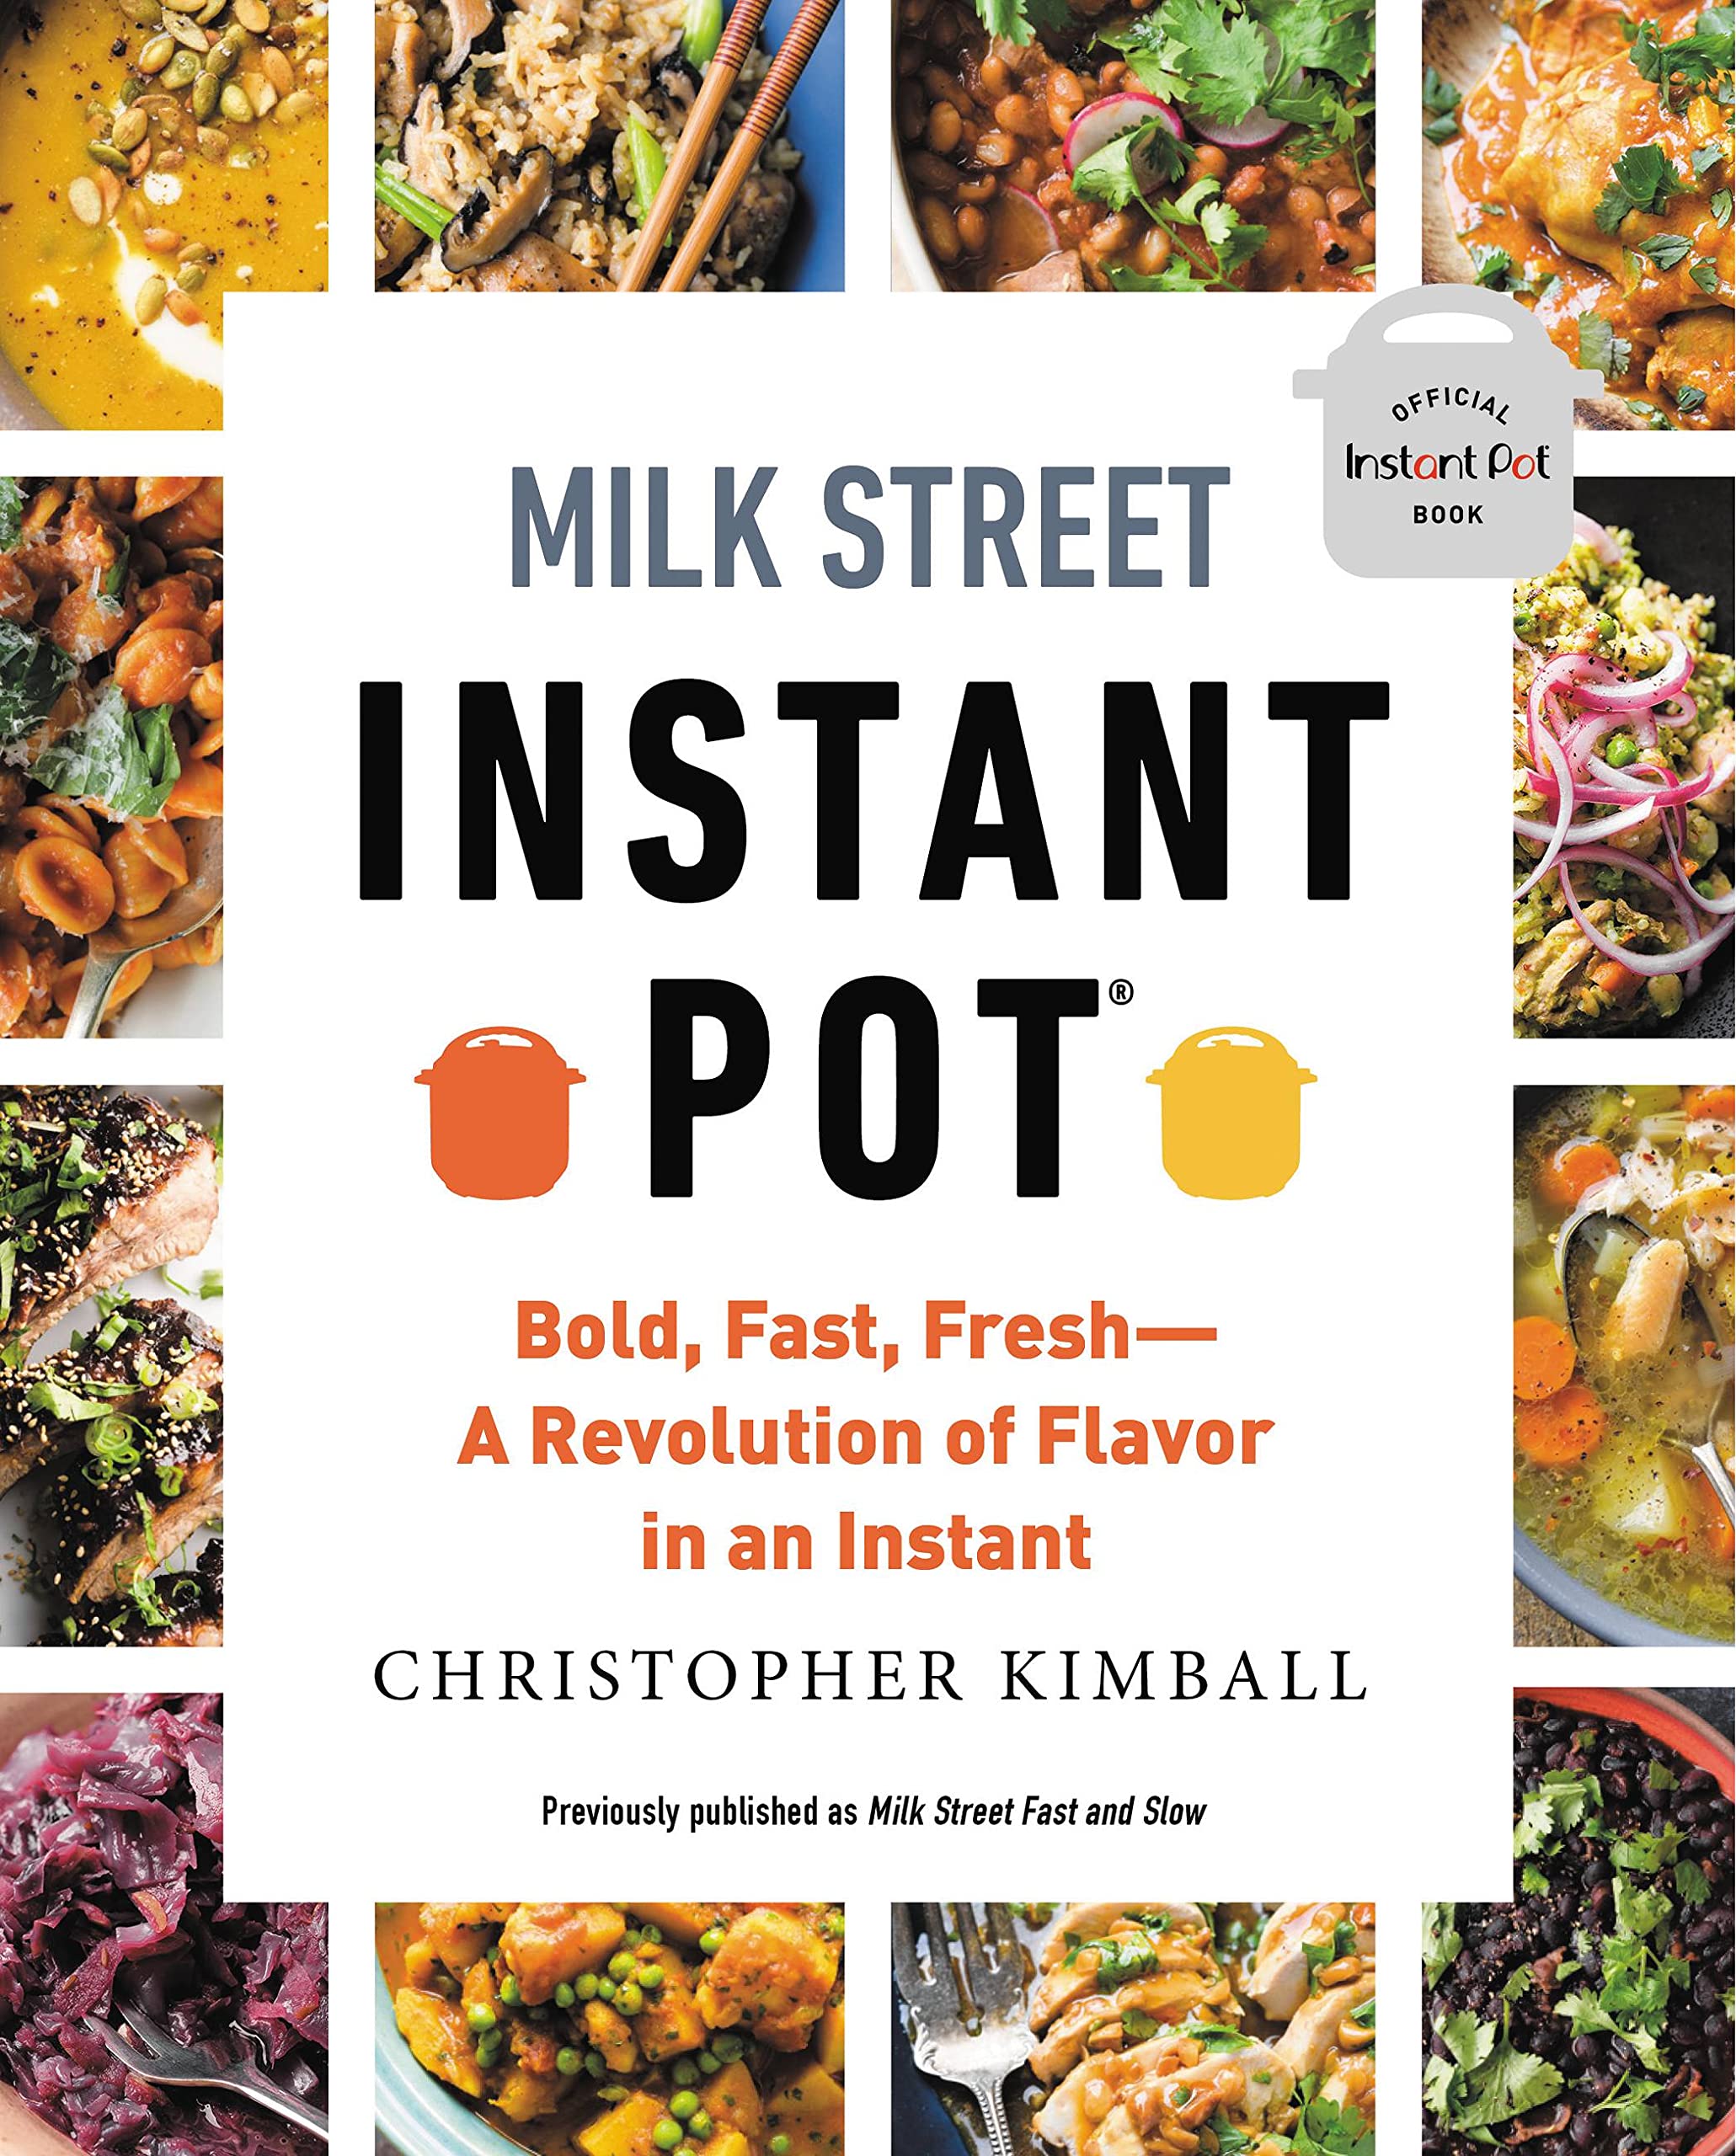 Milk Street Instant Pot: Bold, Fast, Fresh -- A Revolution of Flavor in an Instant (Christopher Kimball)